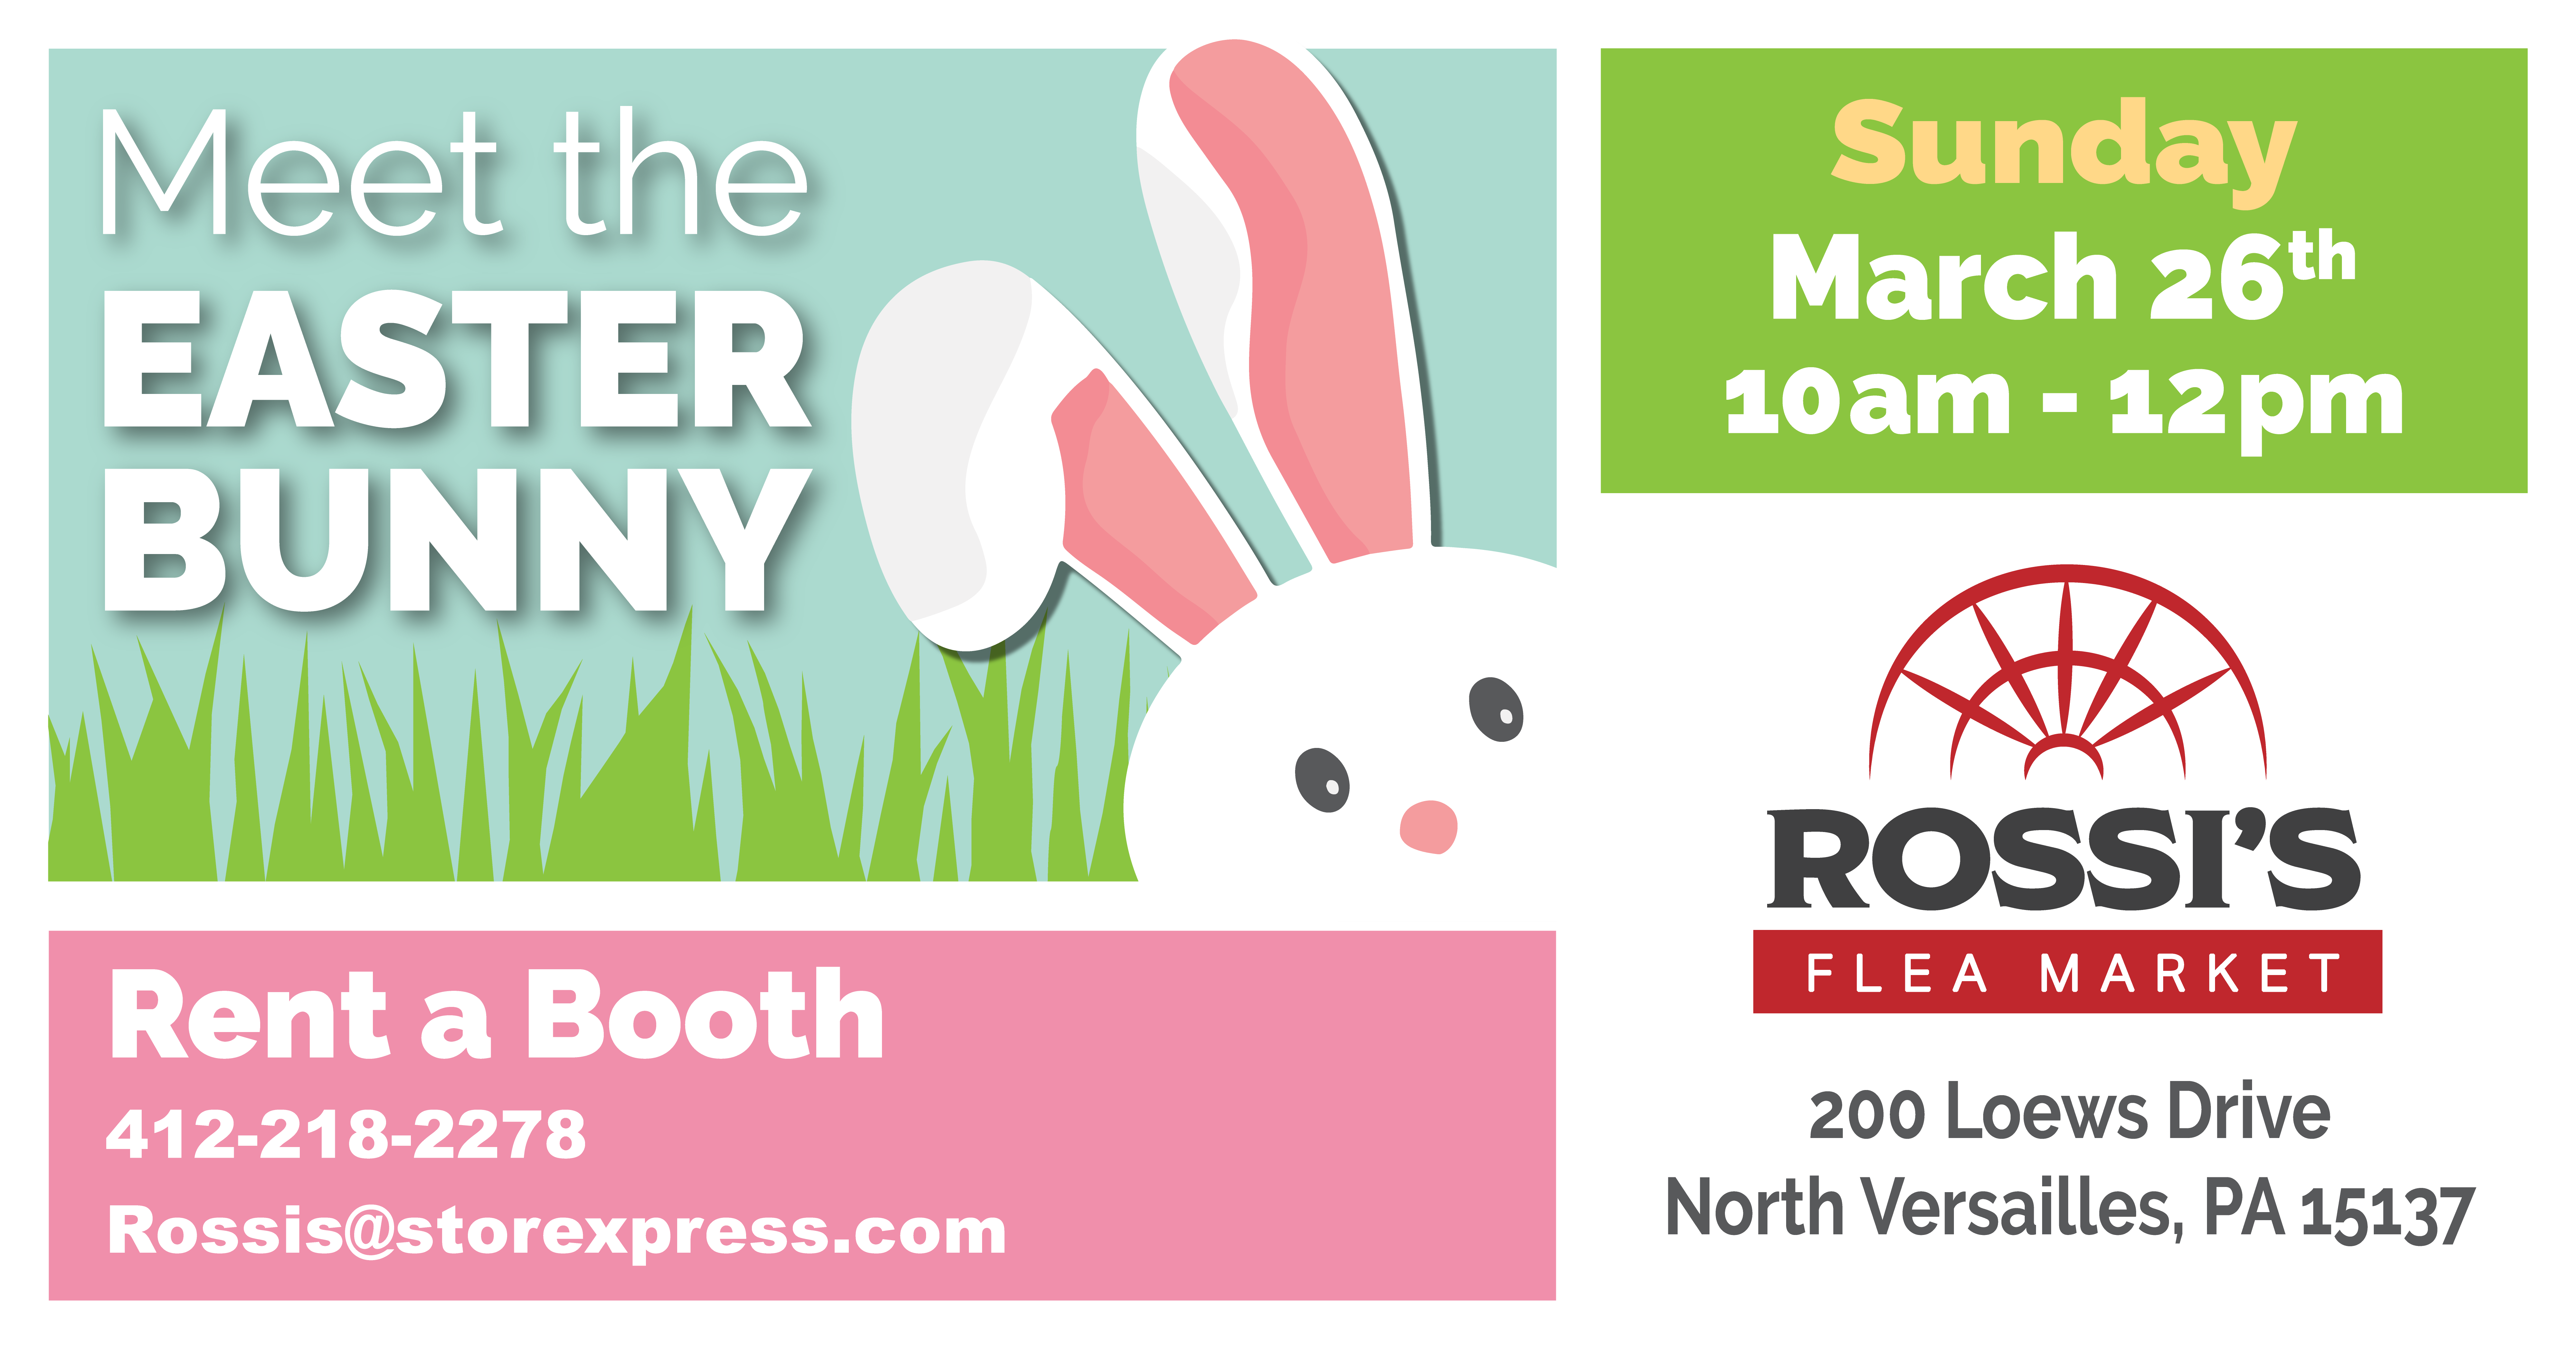 Easter Bunny Meet and Greet Flyer for Event at Rossi's Flea Market